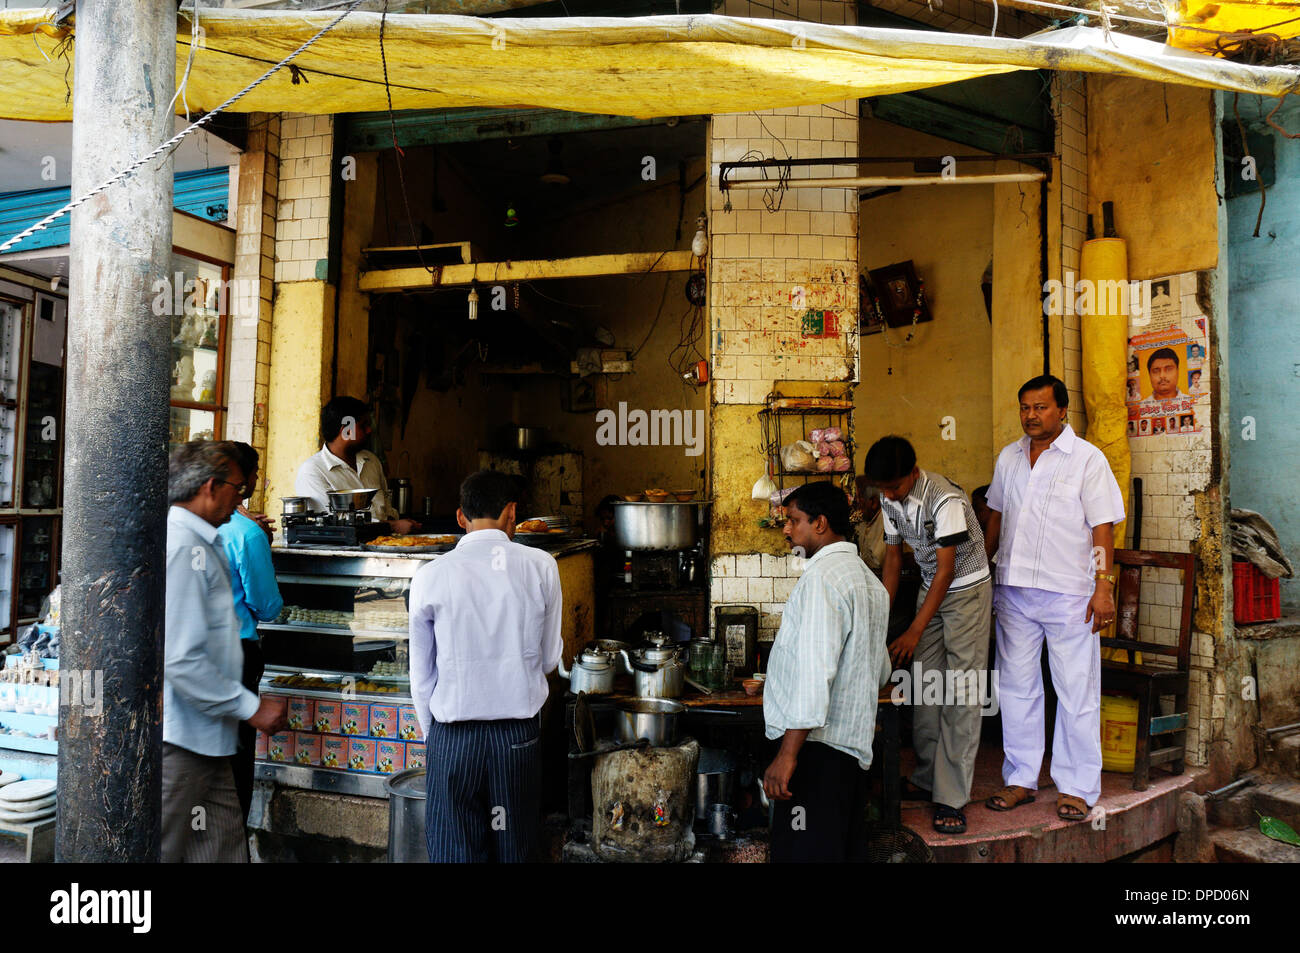 Local people buying street food in India Stock Photo